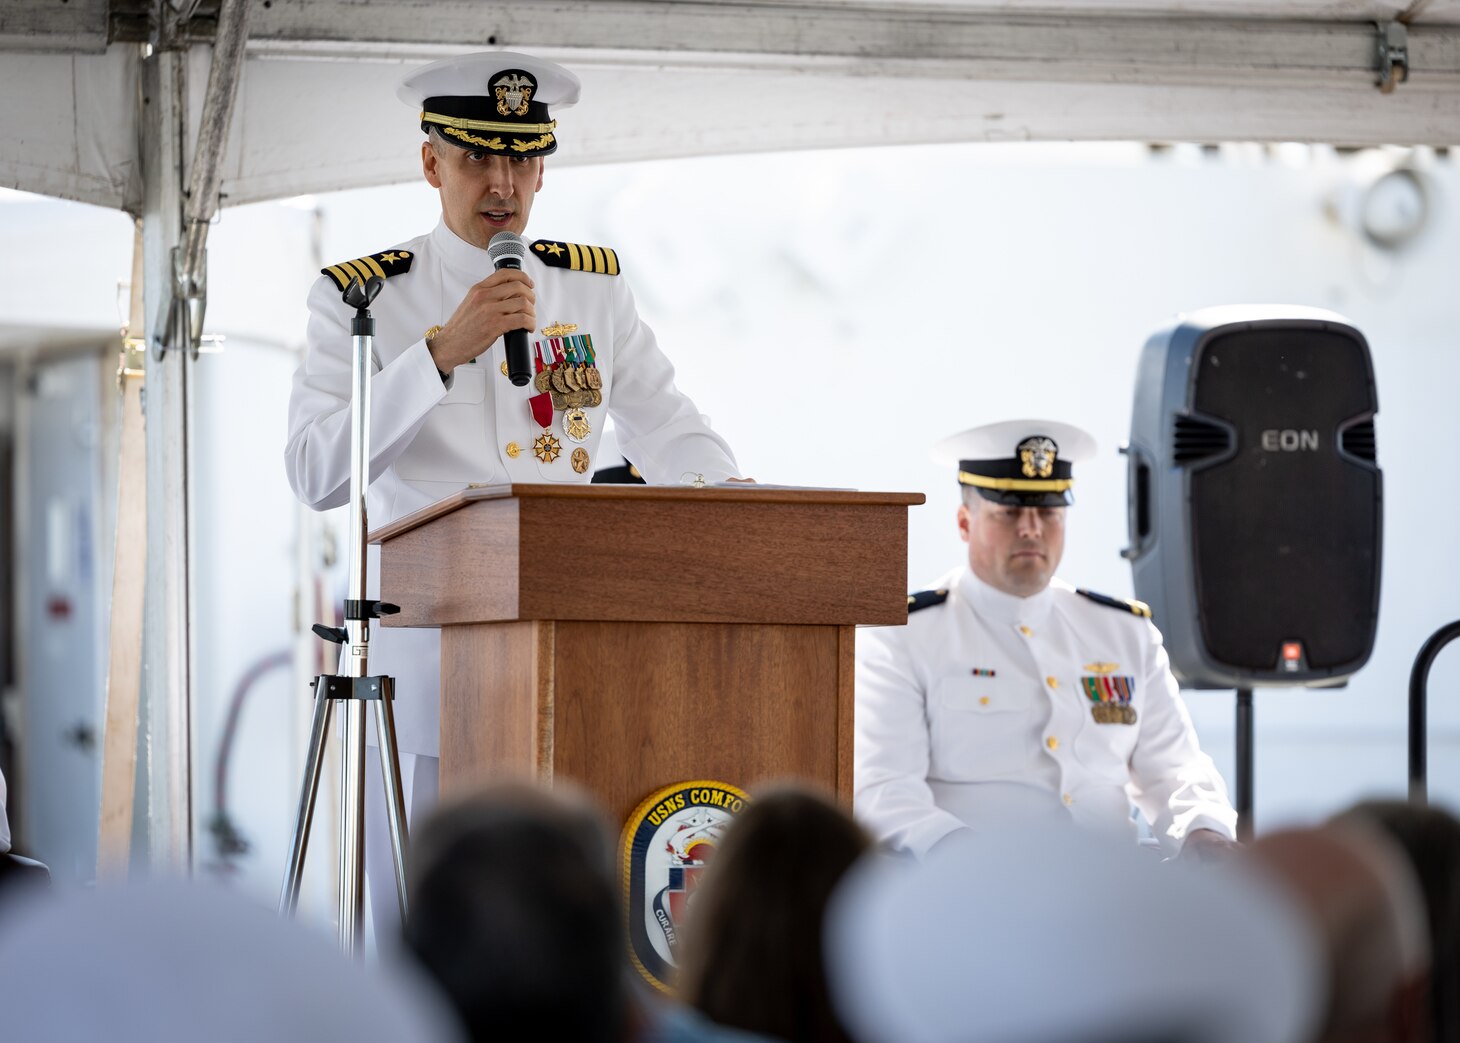 Military Sealift Command’s leadership in the Atlantic changed hands, when Navy Capt. James A. Murdock relieved Navy Capt. Daniel E. Broadhurst as commander of Norfolk-based Military Sealift Command Atlantic (MSC Atlantic) during a change of command ceremony held aboard Navy hospital ship USNS Comfort (T-AH-20) in Naval Station Norfolk April 13, 2023. Pictured above is Broadhurst who will assume duties as the chief of staff for MSC headquarters in Norfolk.